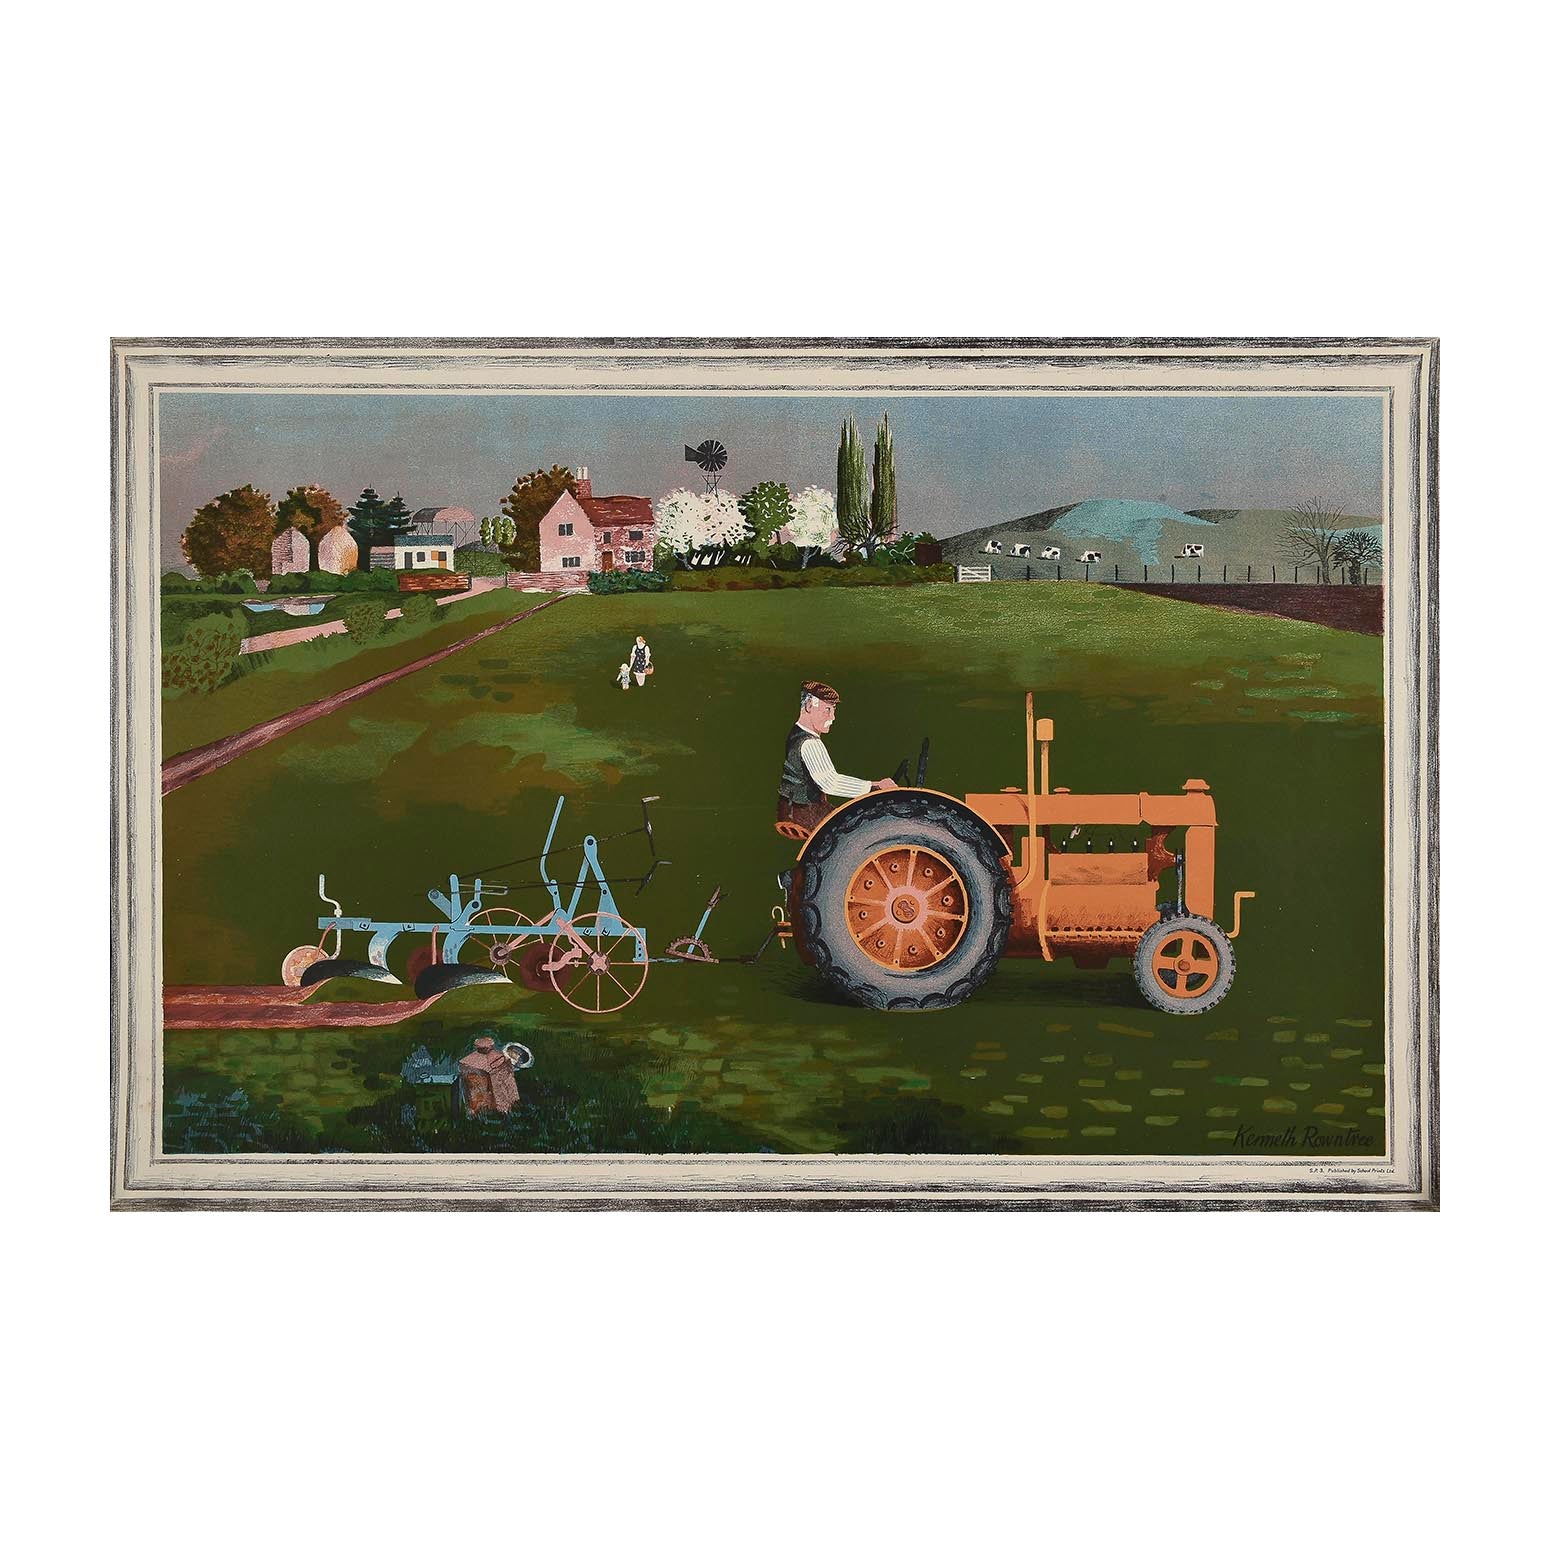 Original ‘School Print’, Tractor in Landscape, by Kenneth Rowntree, and published by School Prints Ltd, 1945. The design depicts a farmer ploughing a field with a brightly painted Fordson tractor.